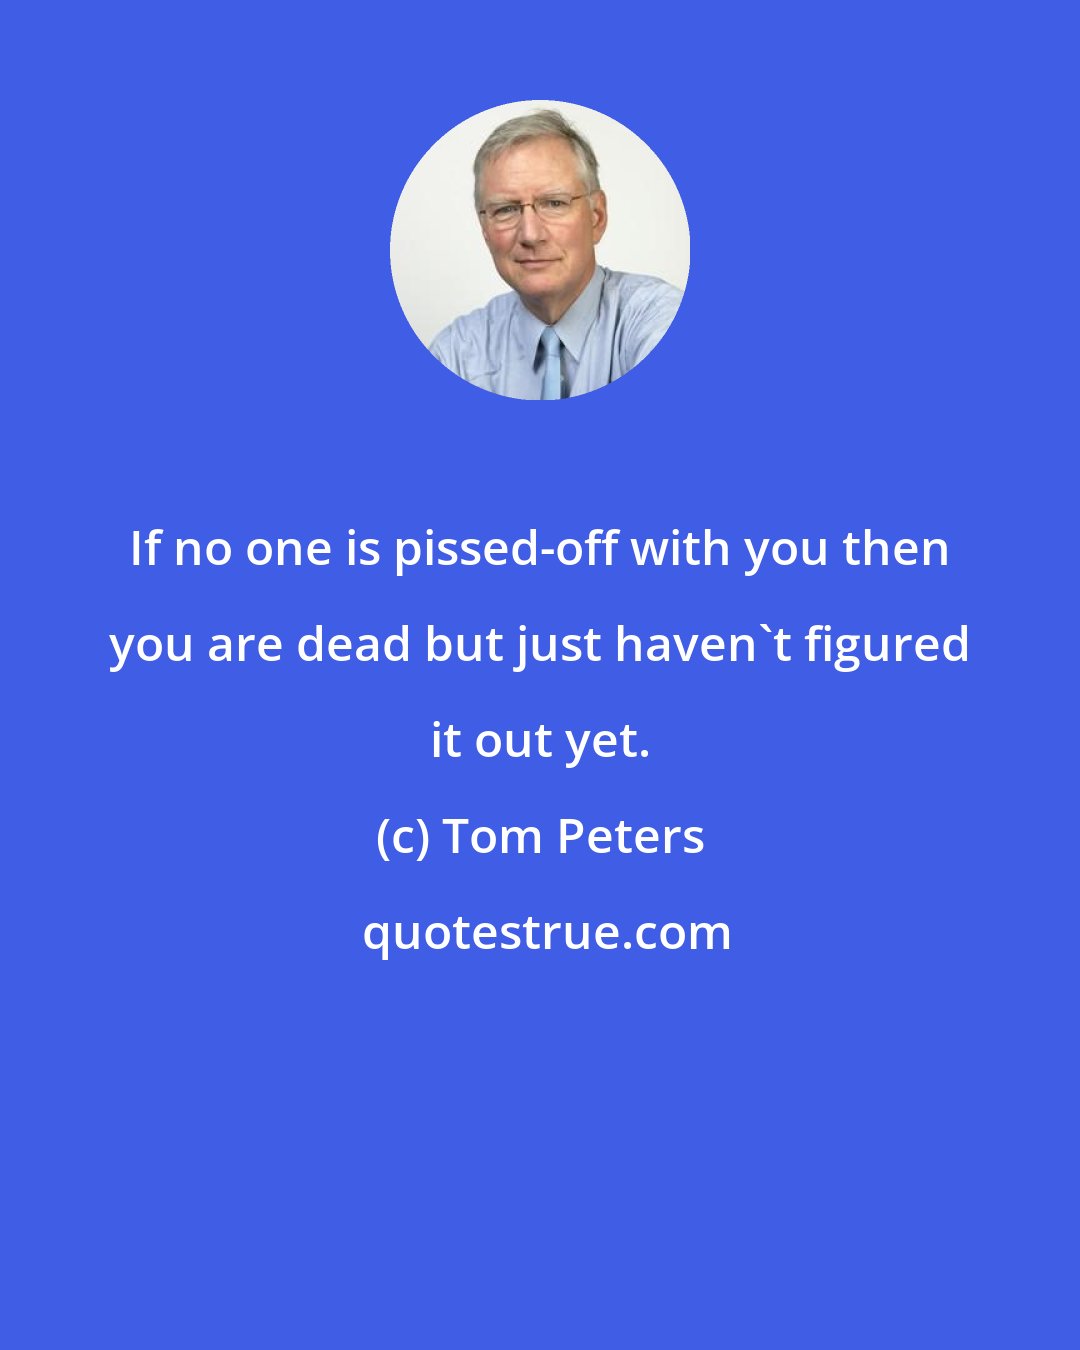 Tom Peters: If no one is pissed-off with you then you are dead but just haven't figured it out yet.